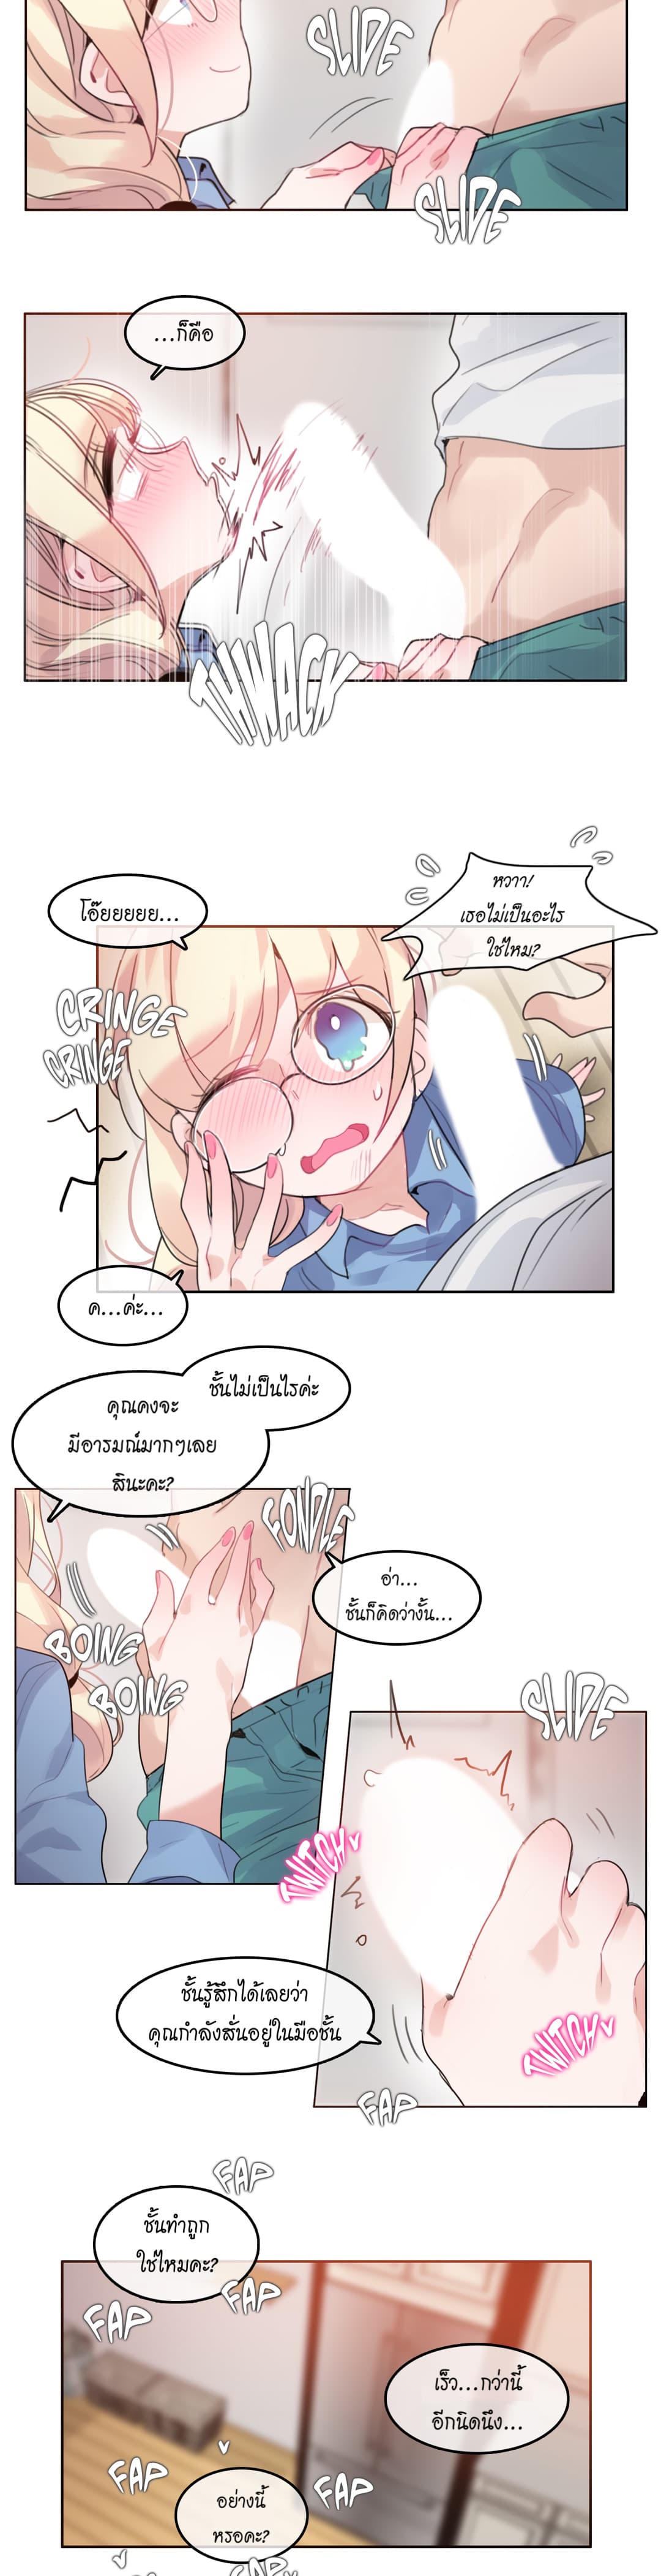 A Pervert’s Daily Life 29 (5)